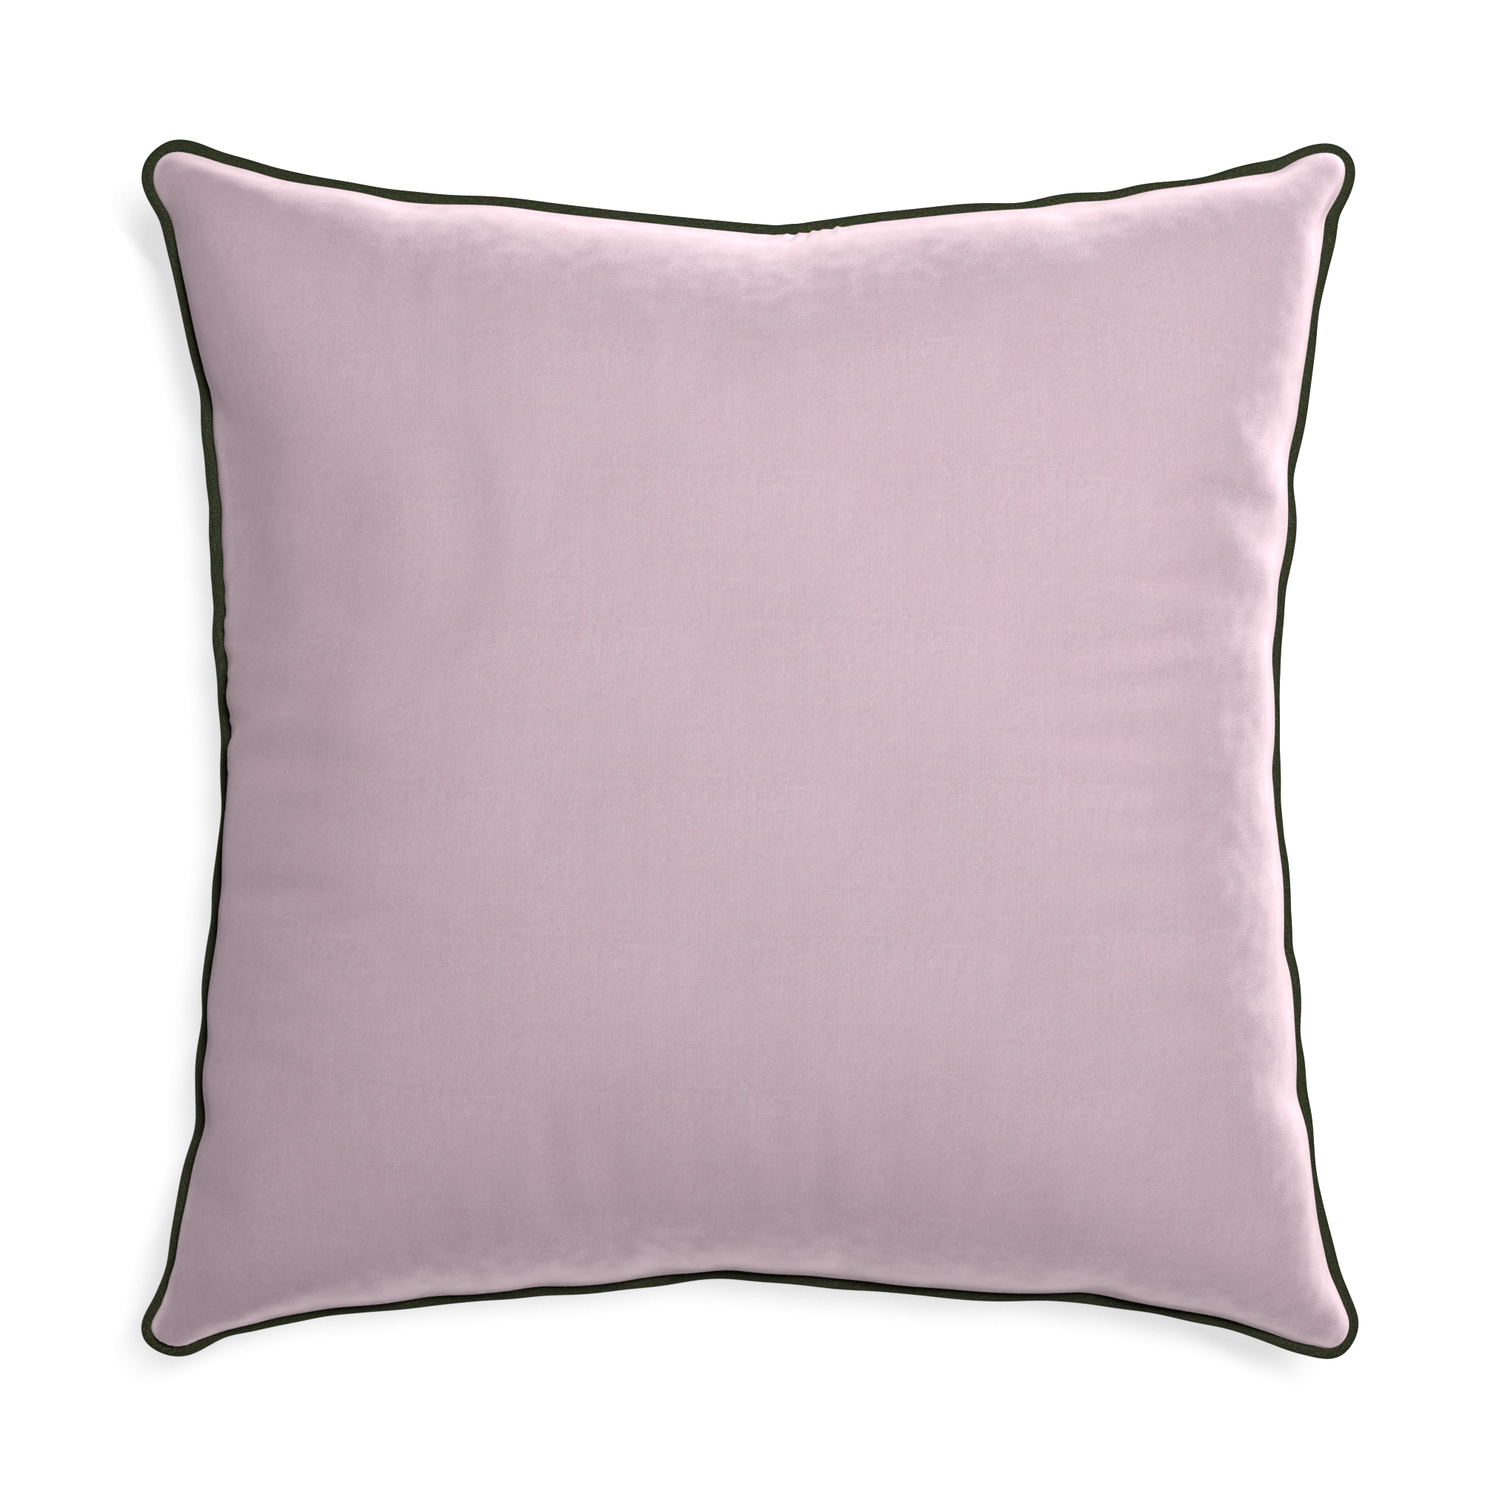 square lilac velvet pillow with fern green piping